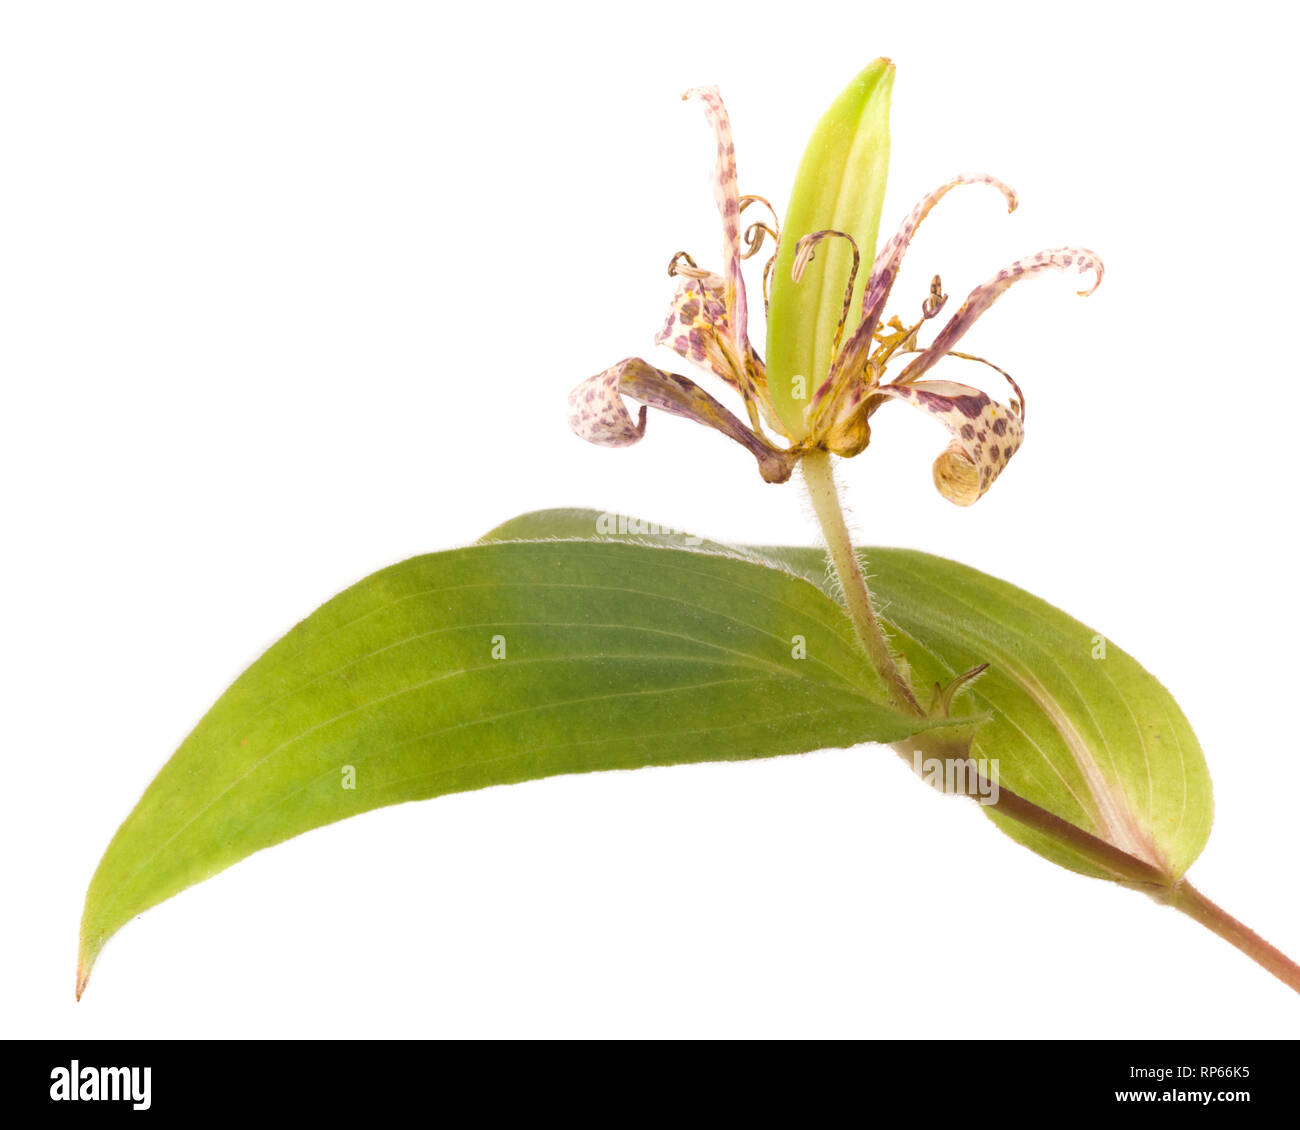 Toad Lily, Tricyrtis hirta, with Seed Pod and Leaf against White Background Stock Photo